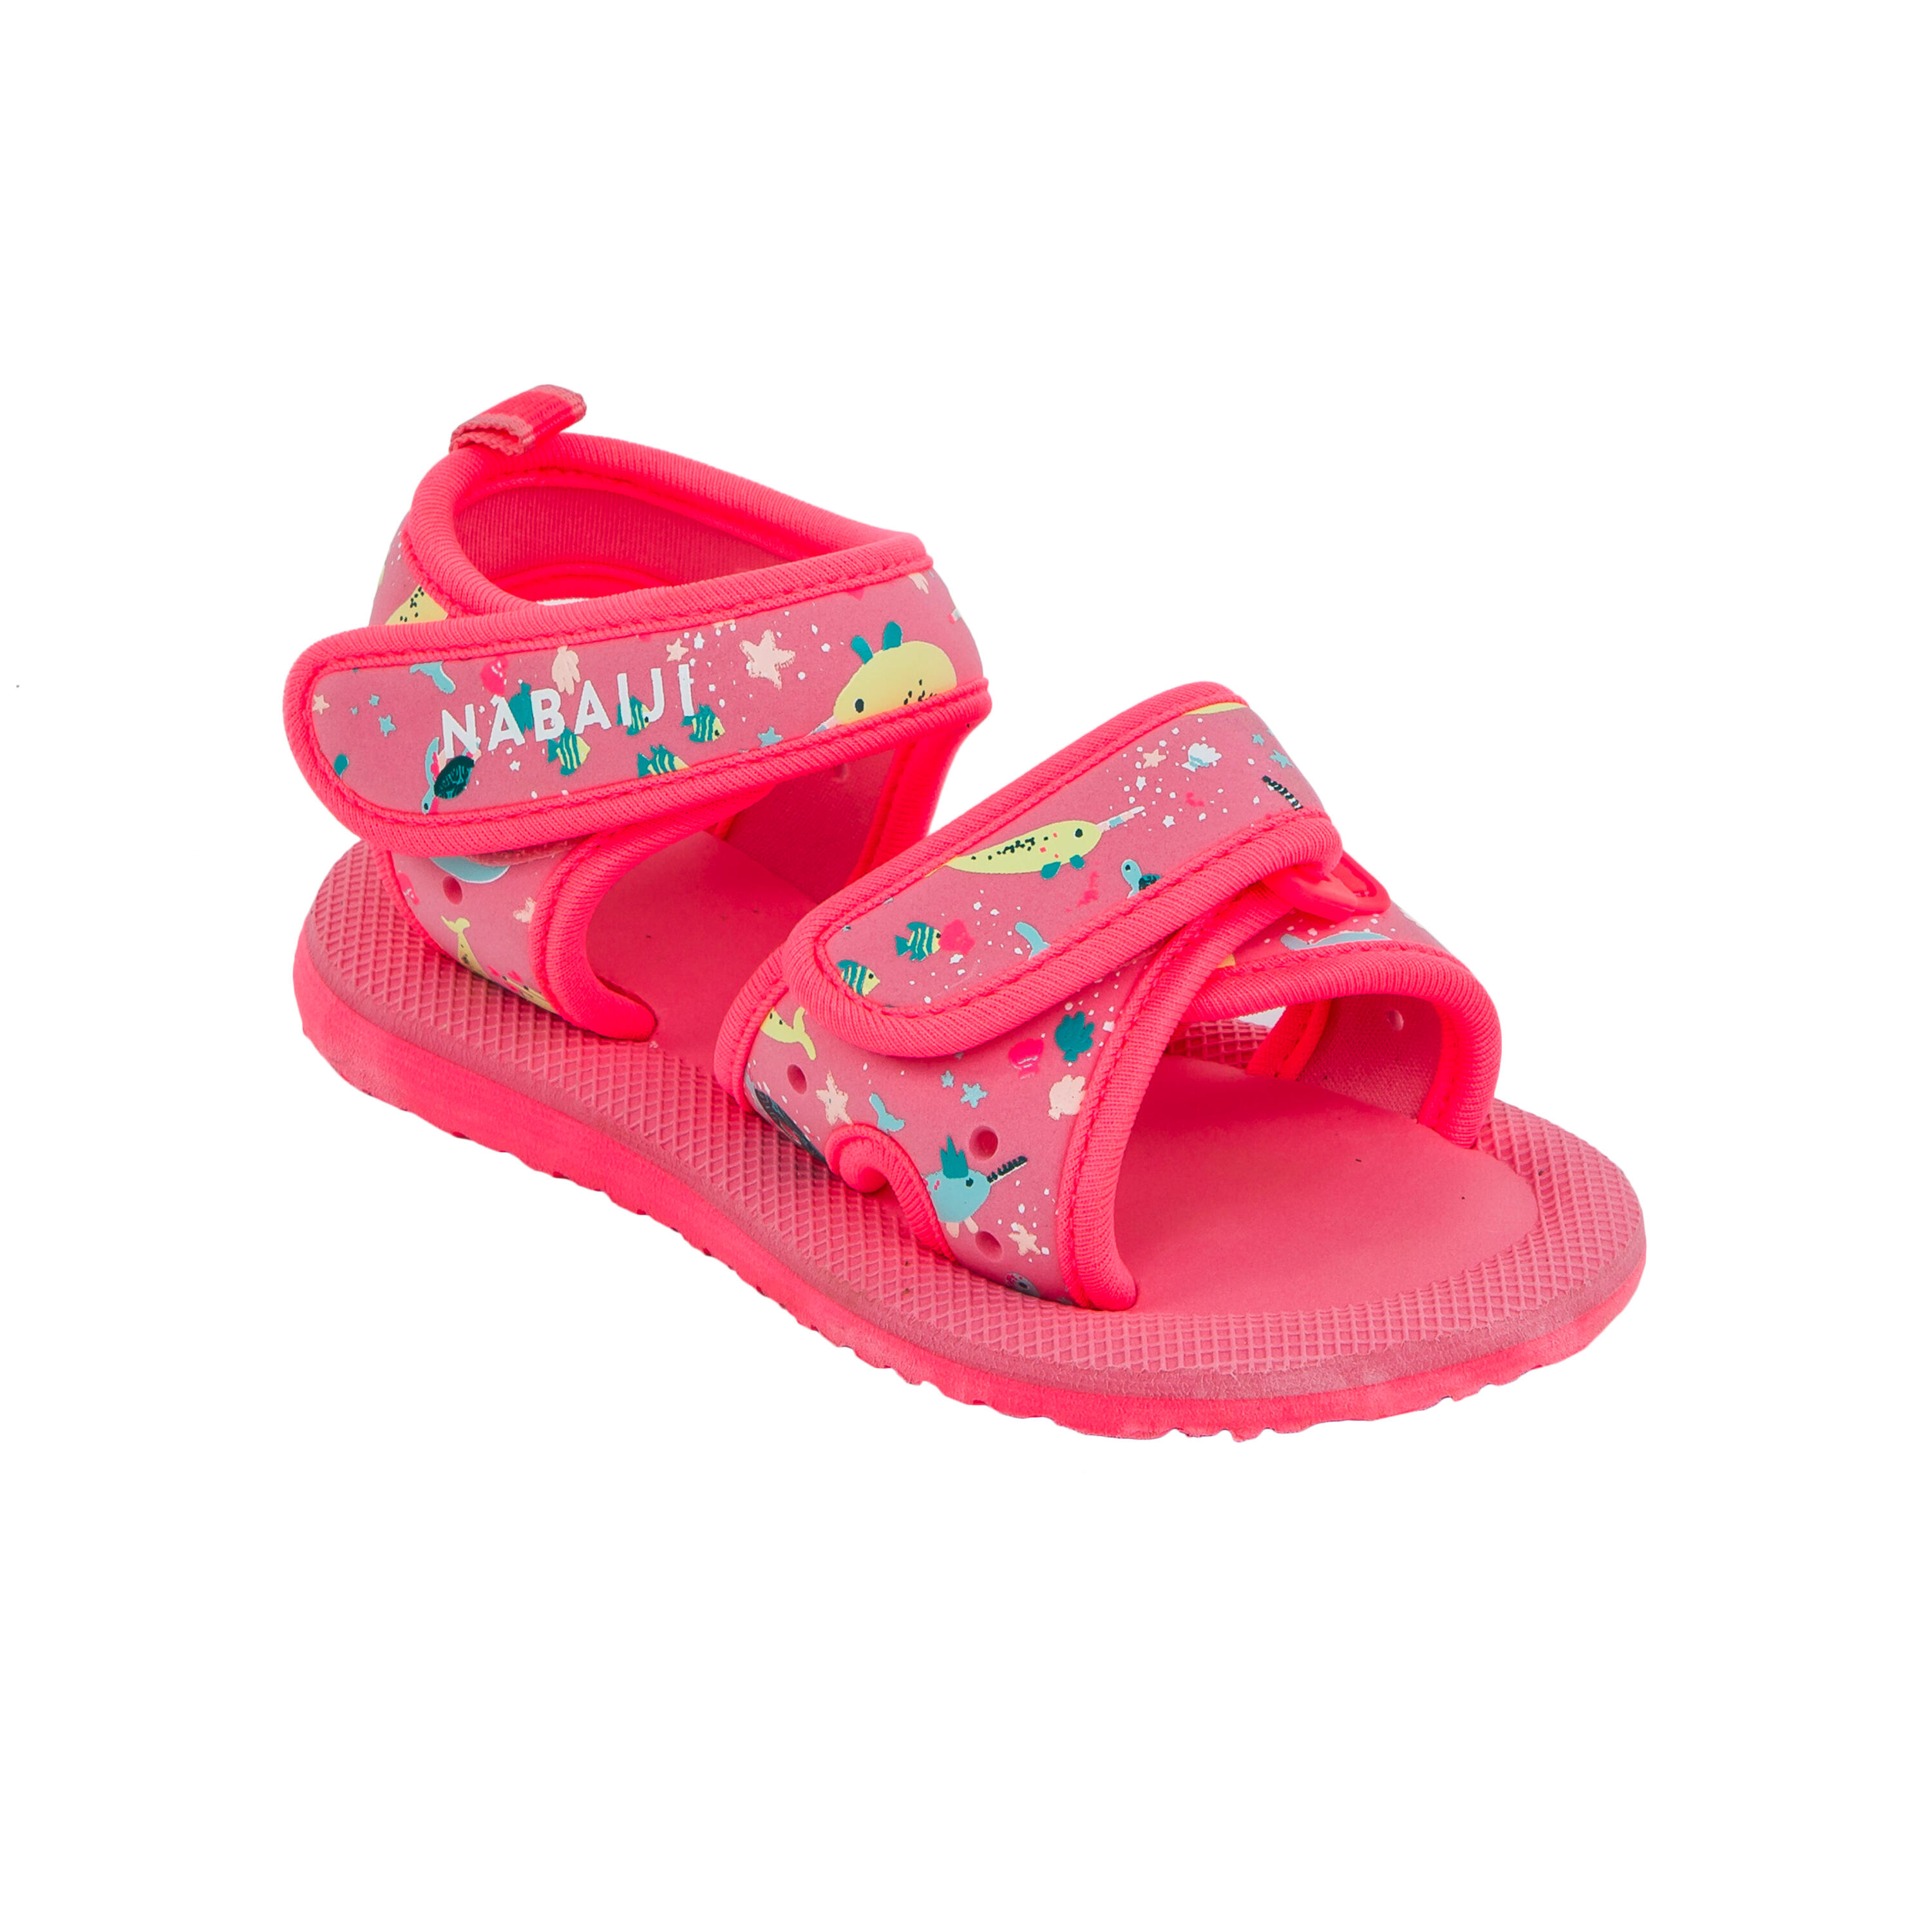 Baby Swimming Sandals - Pink 1/4